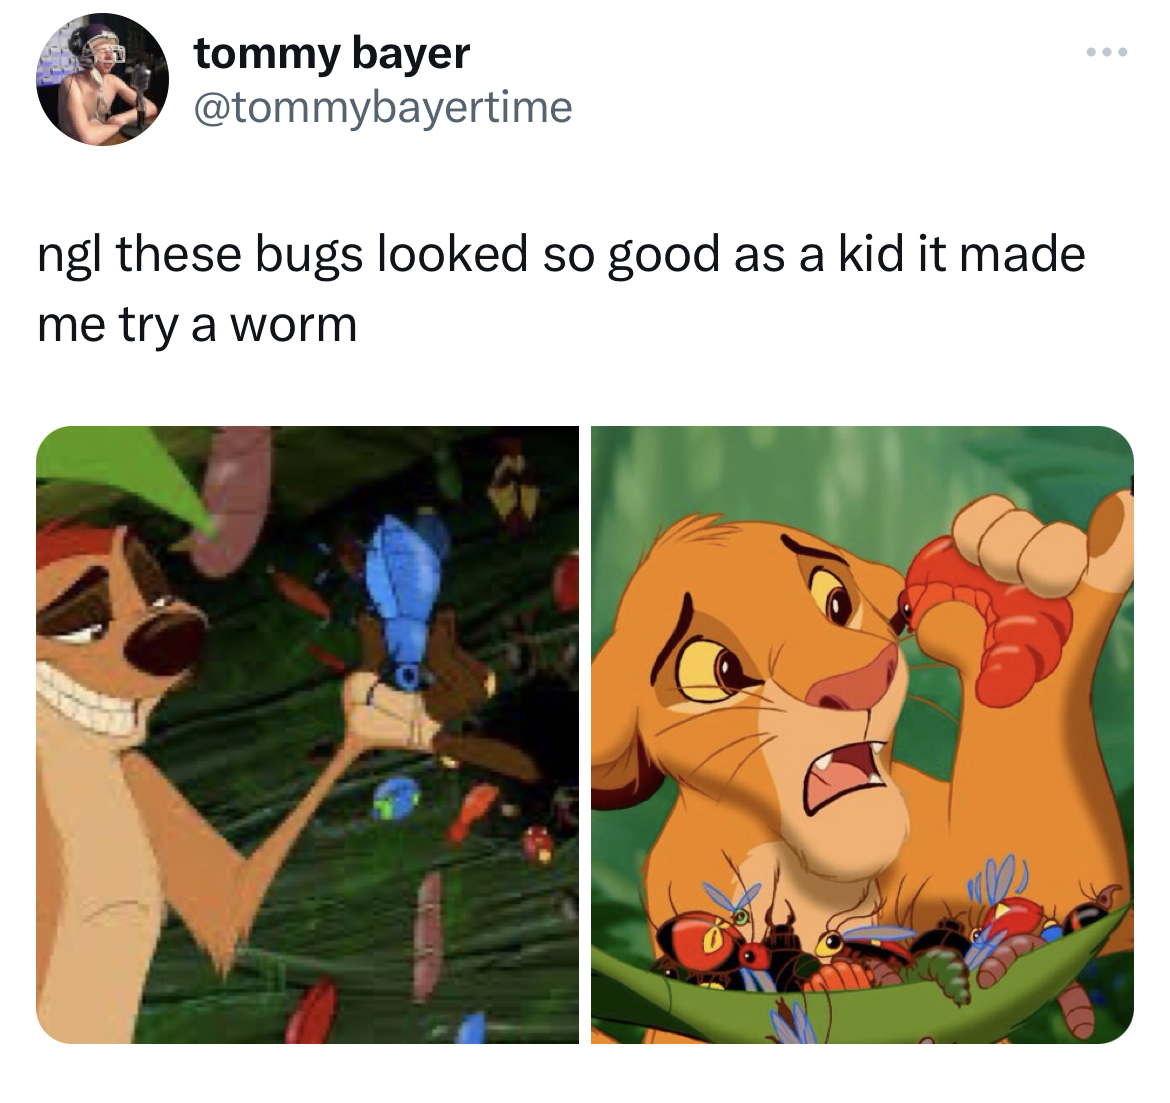 savage tweets cartoon - tommy bayer ngl these bugs looked so good as a kid it made me try a worm